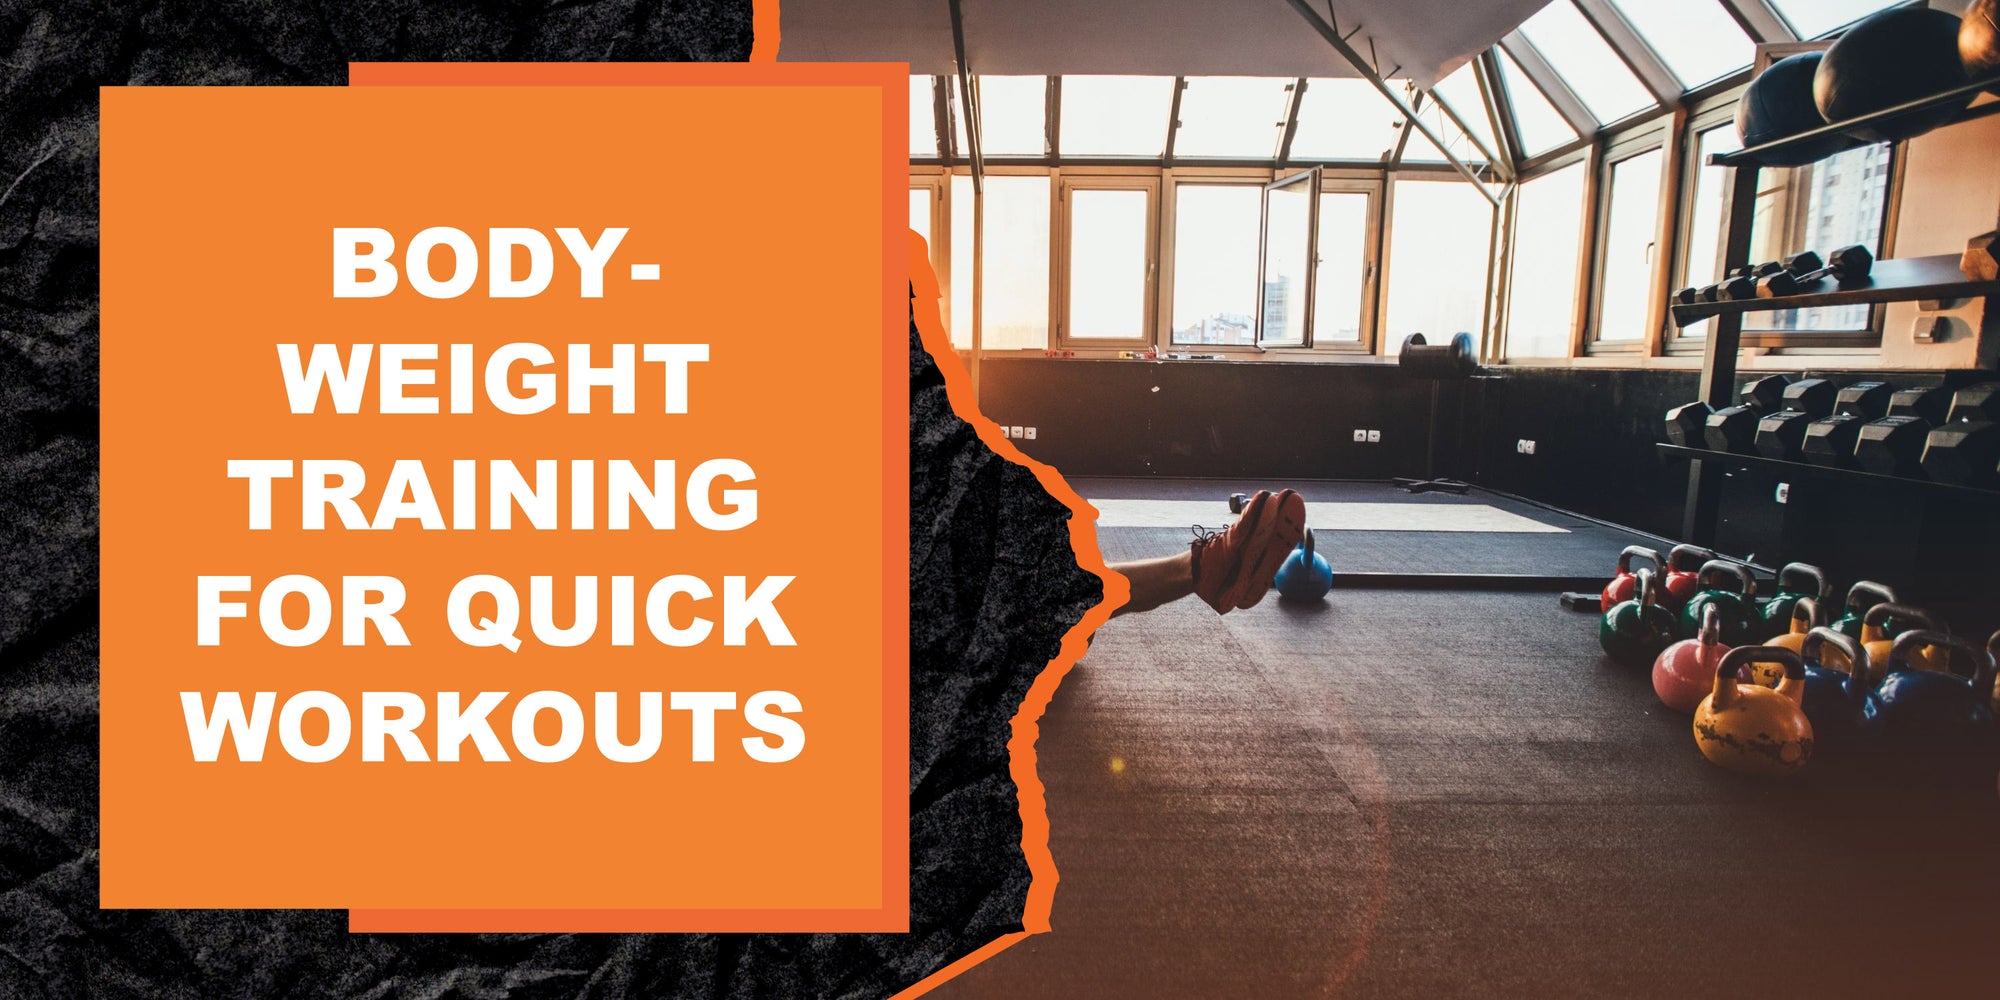 The Benefits of Circuit Training for Quick Workouts